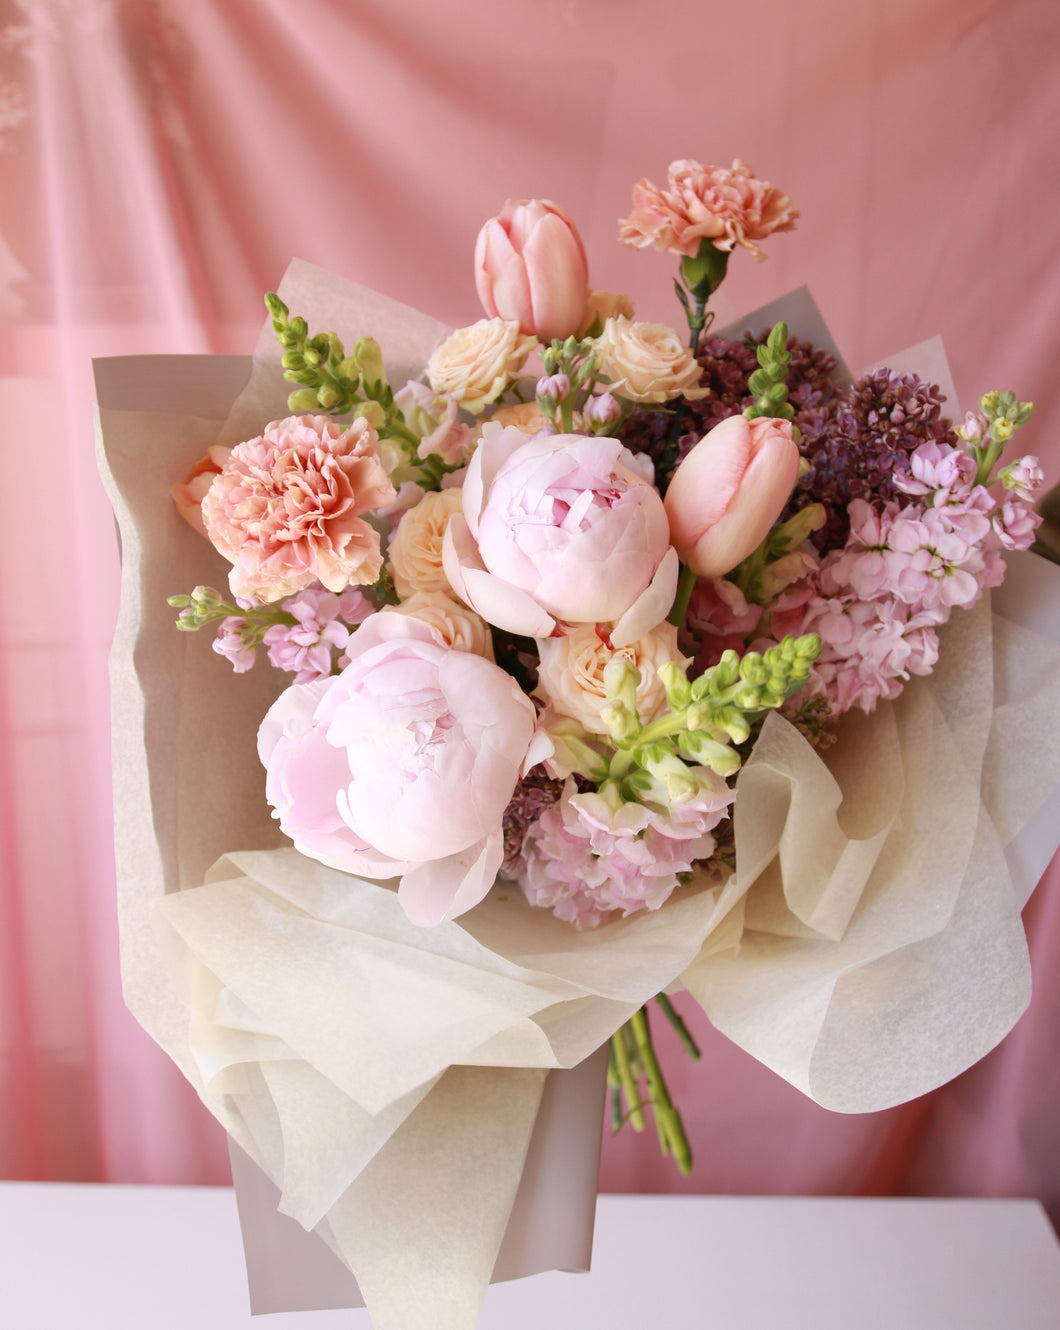 The Darling Bouquet